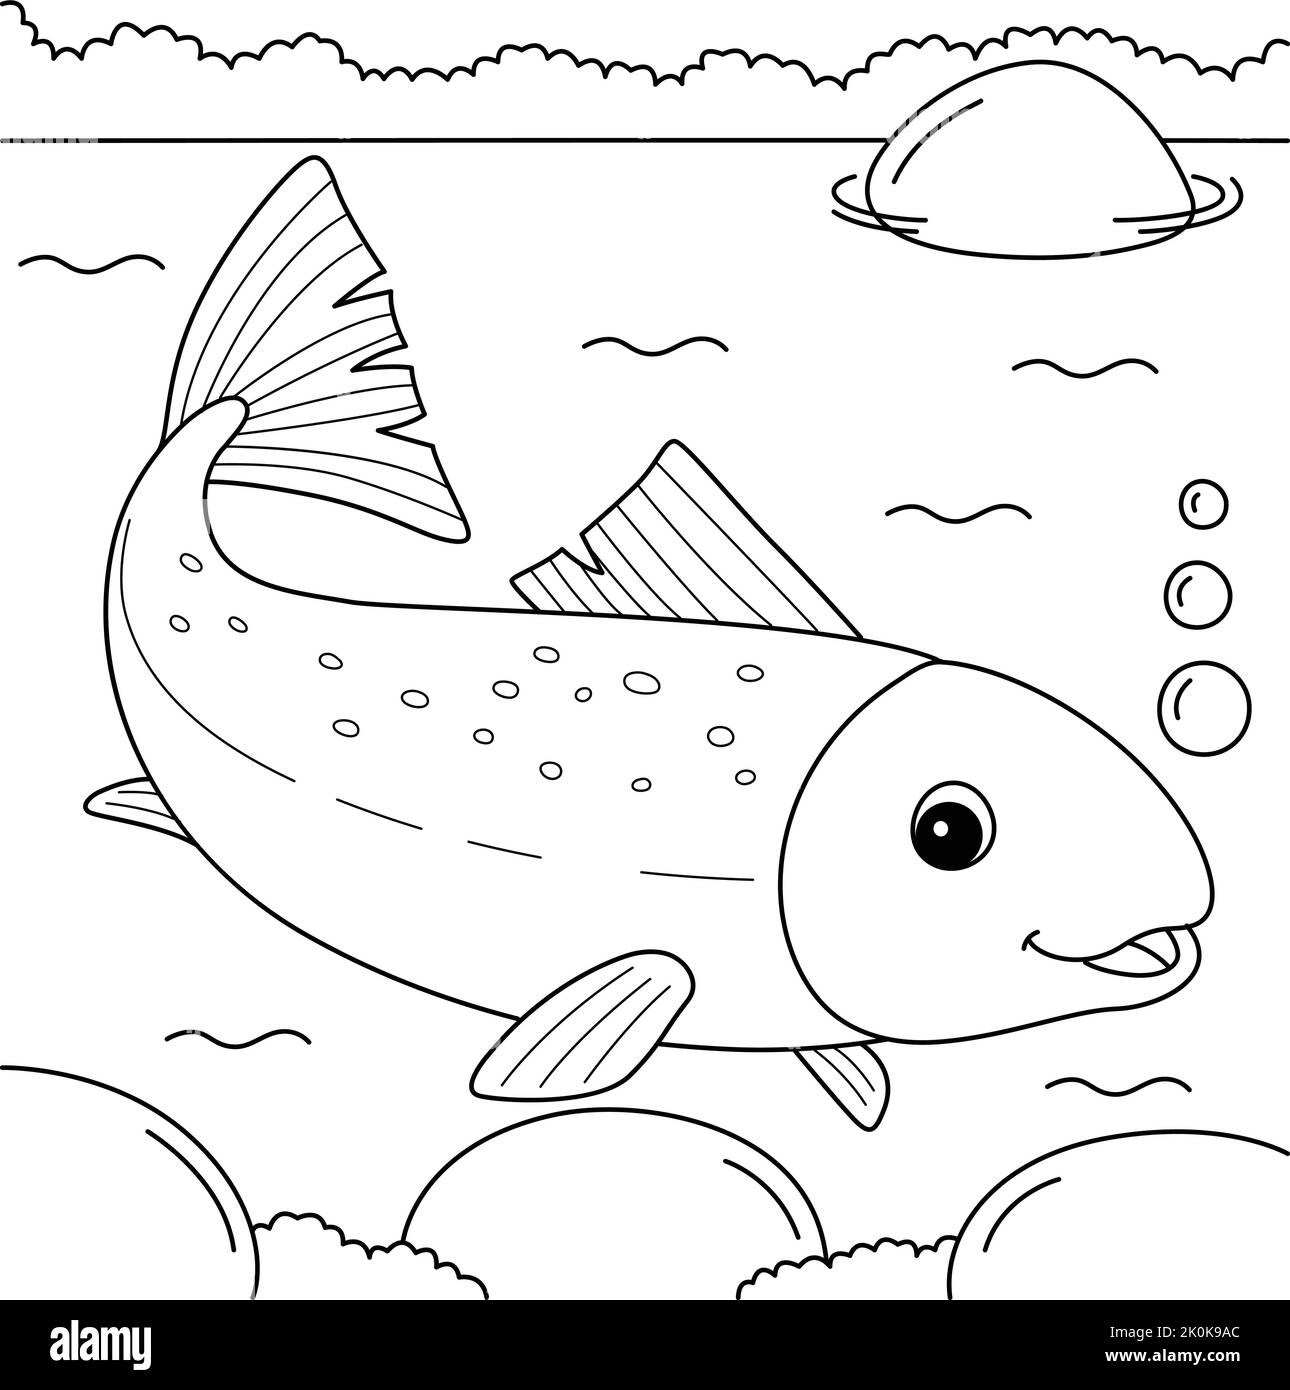 Salmon Animal Coloring Page for Kids Stock Vector